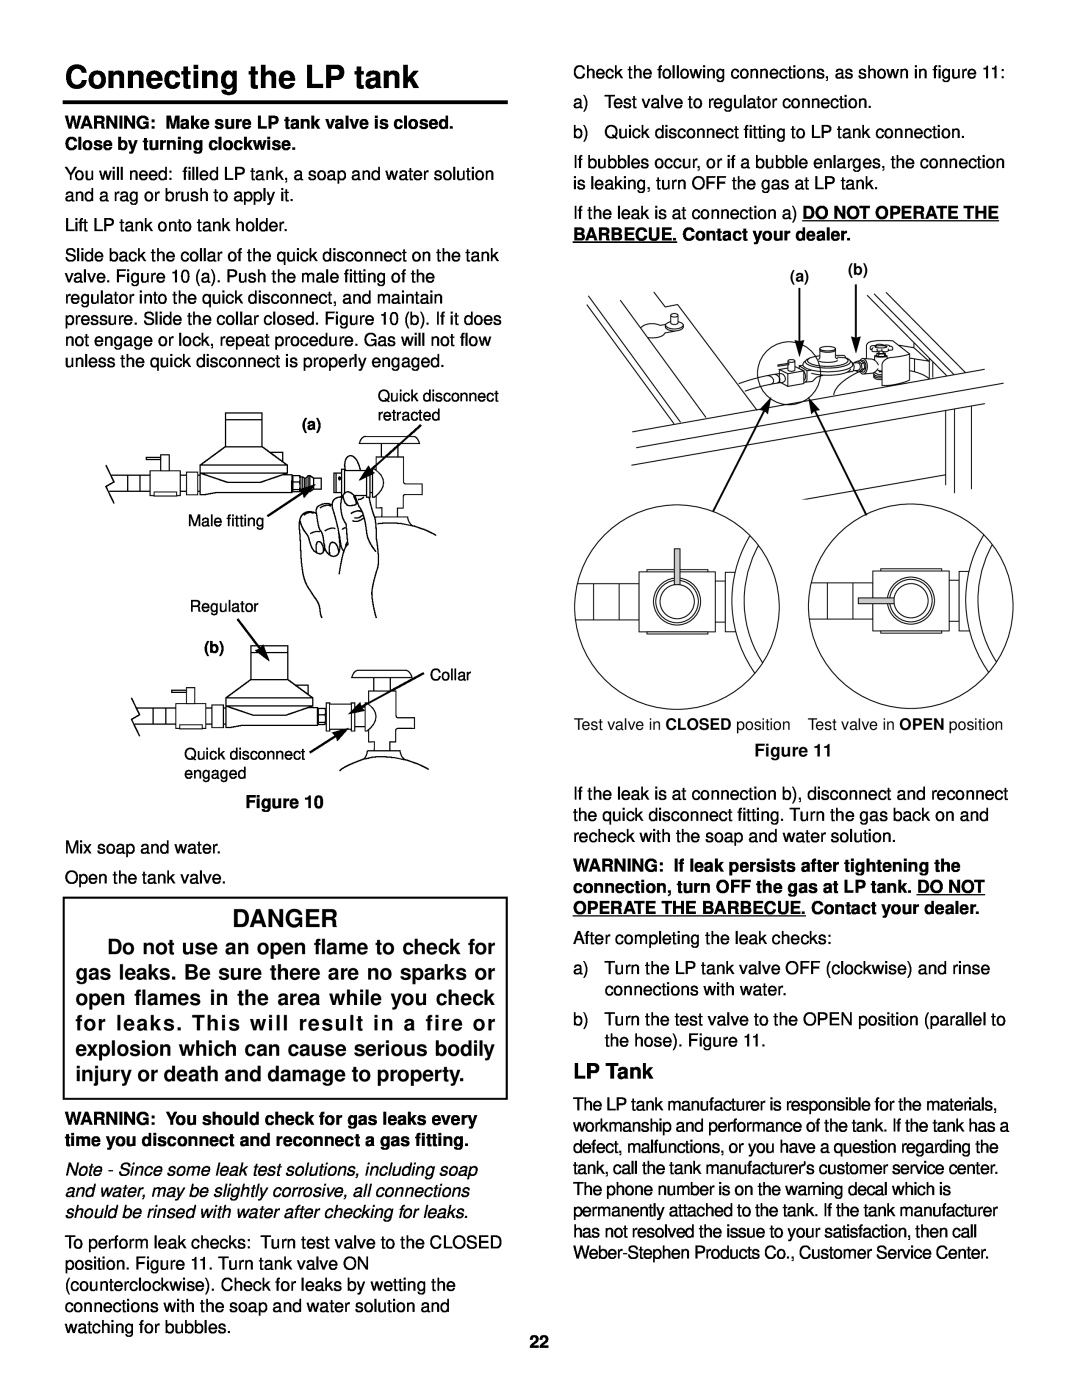 Weber Burner owner manual Connecting the LP tank, Danger, LP Tank, BARBECUE.Contact your dealer 